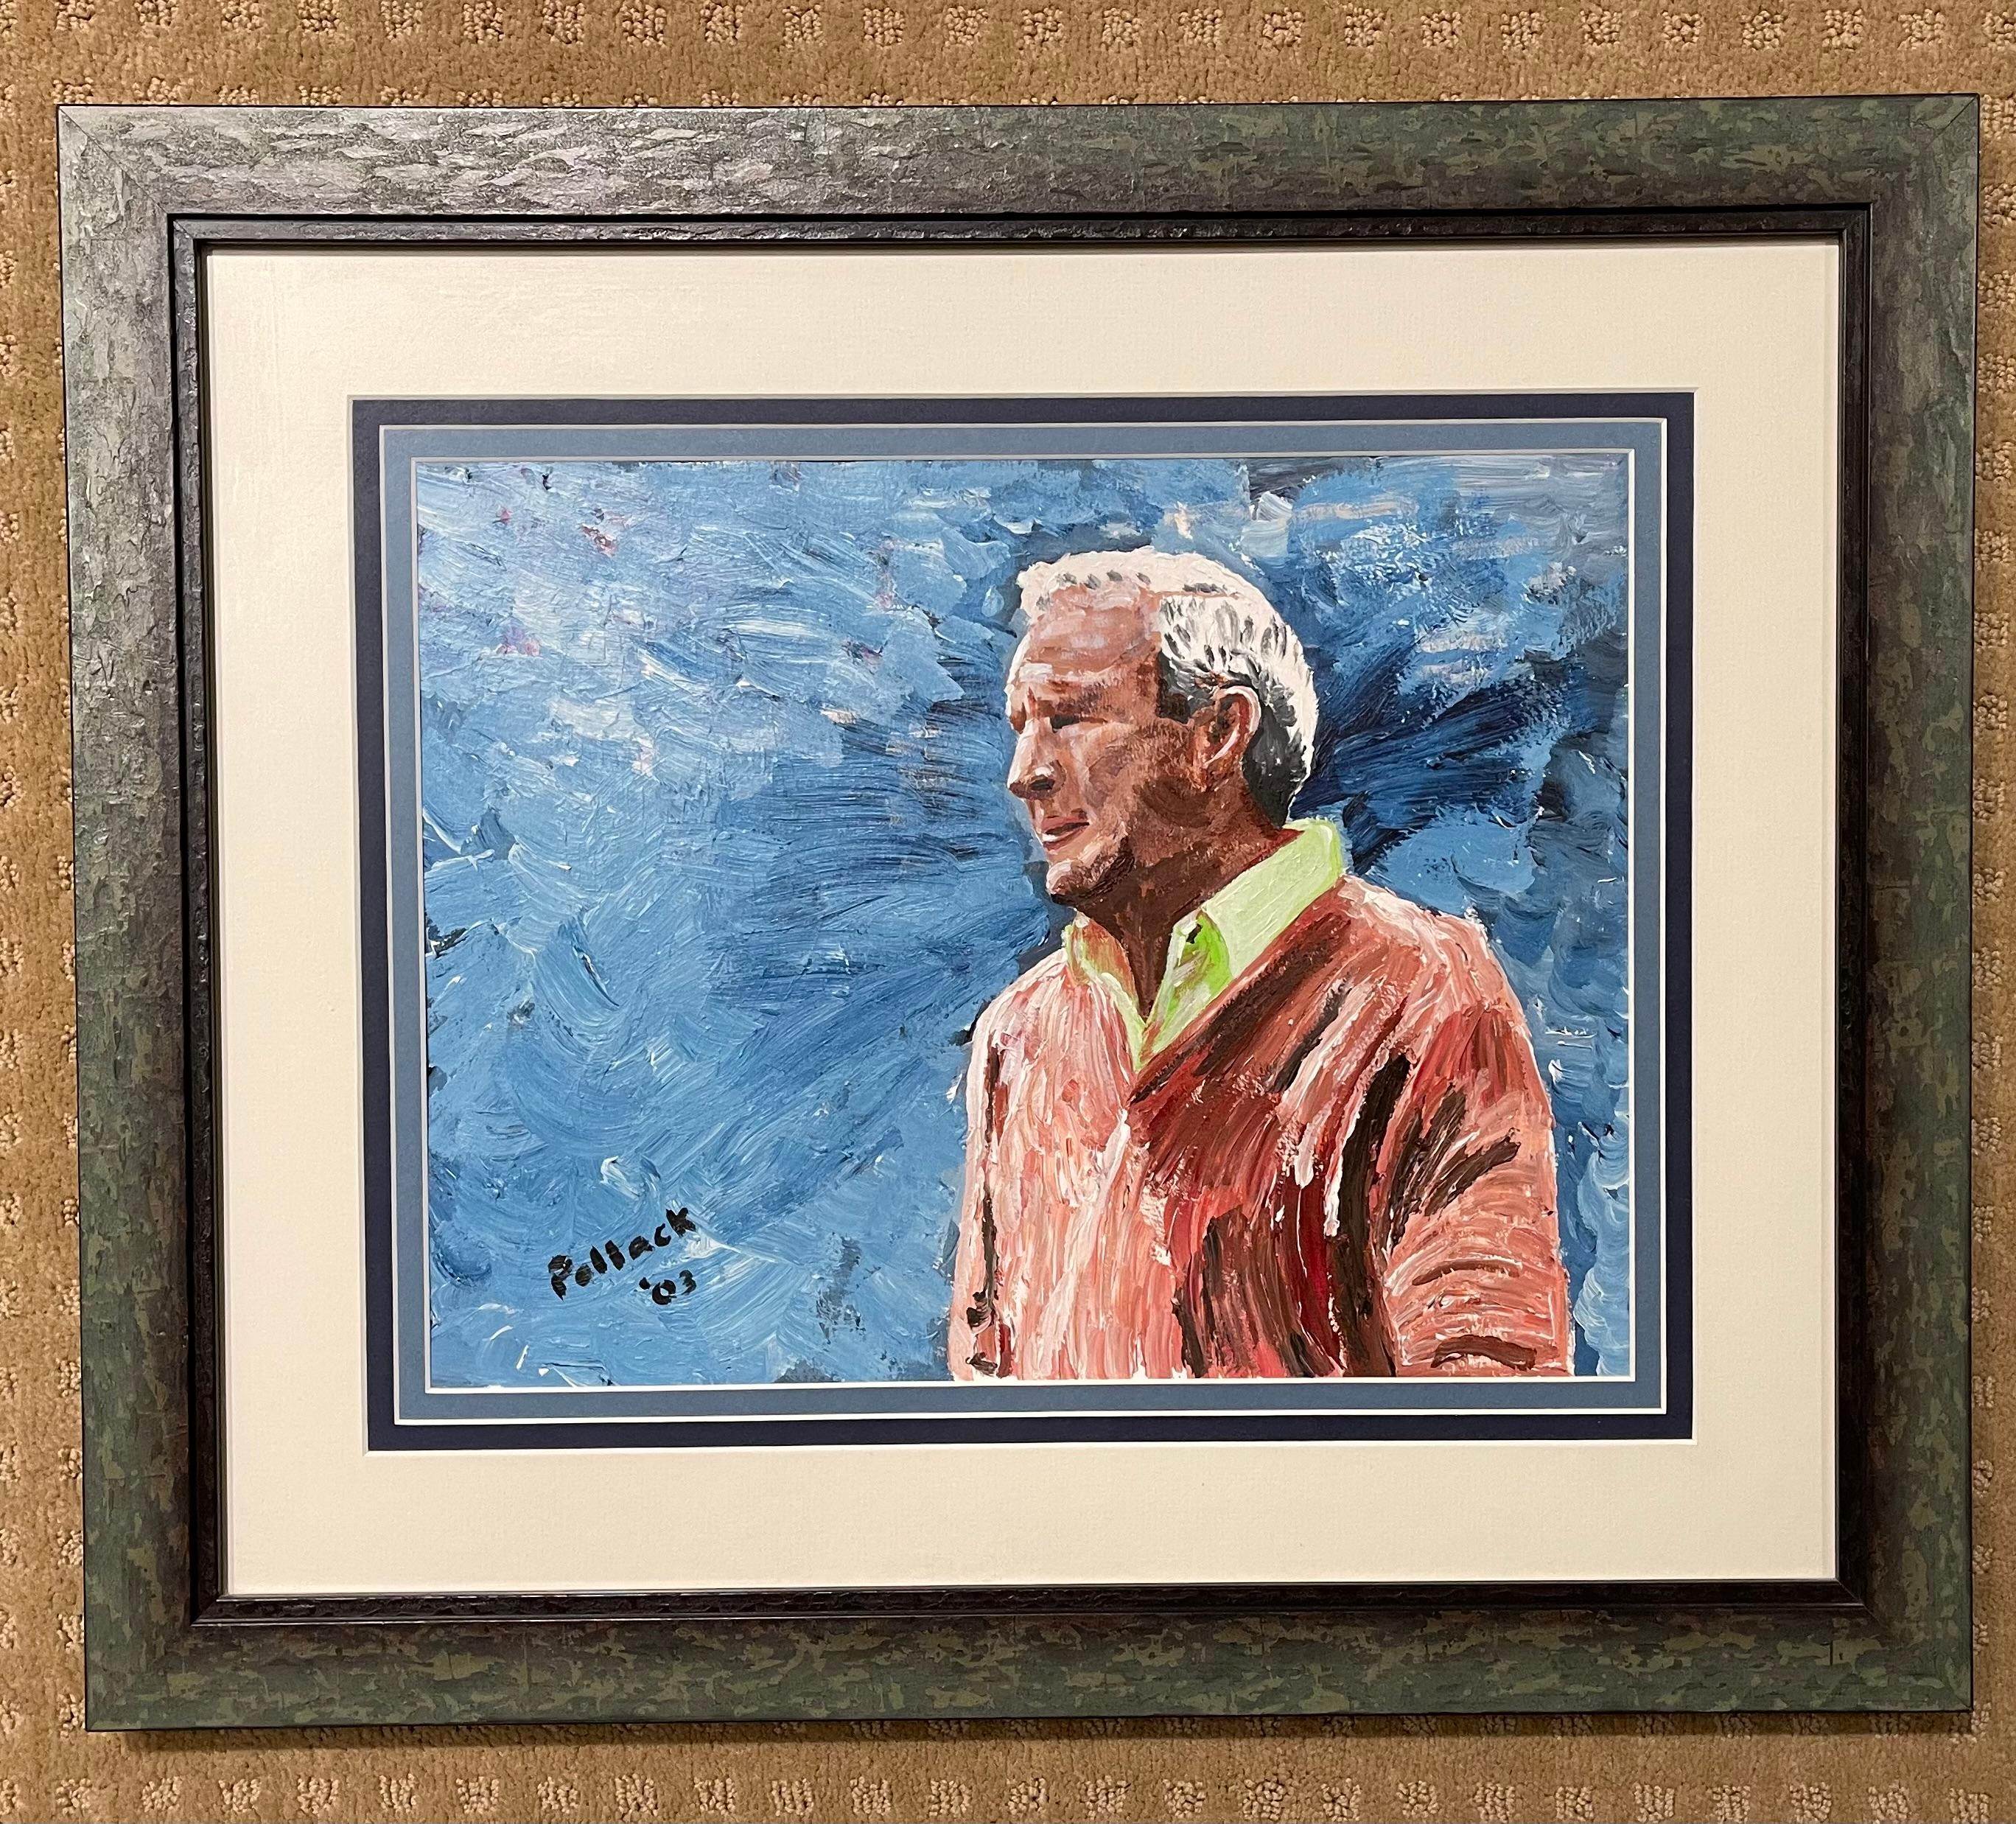 ARNOLD PALMER - Painting by Bob Pollack